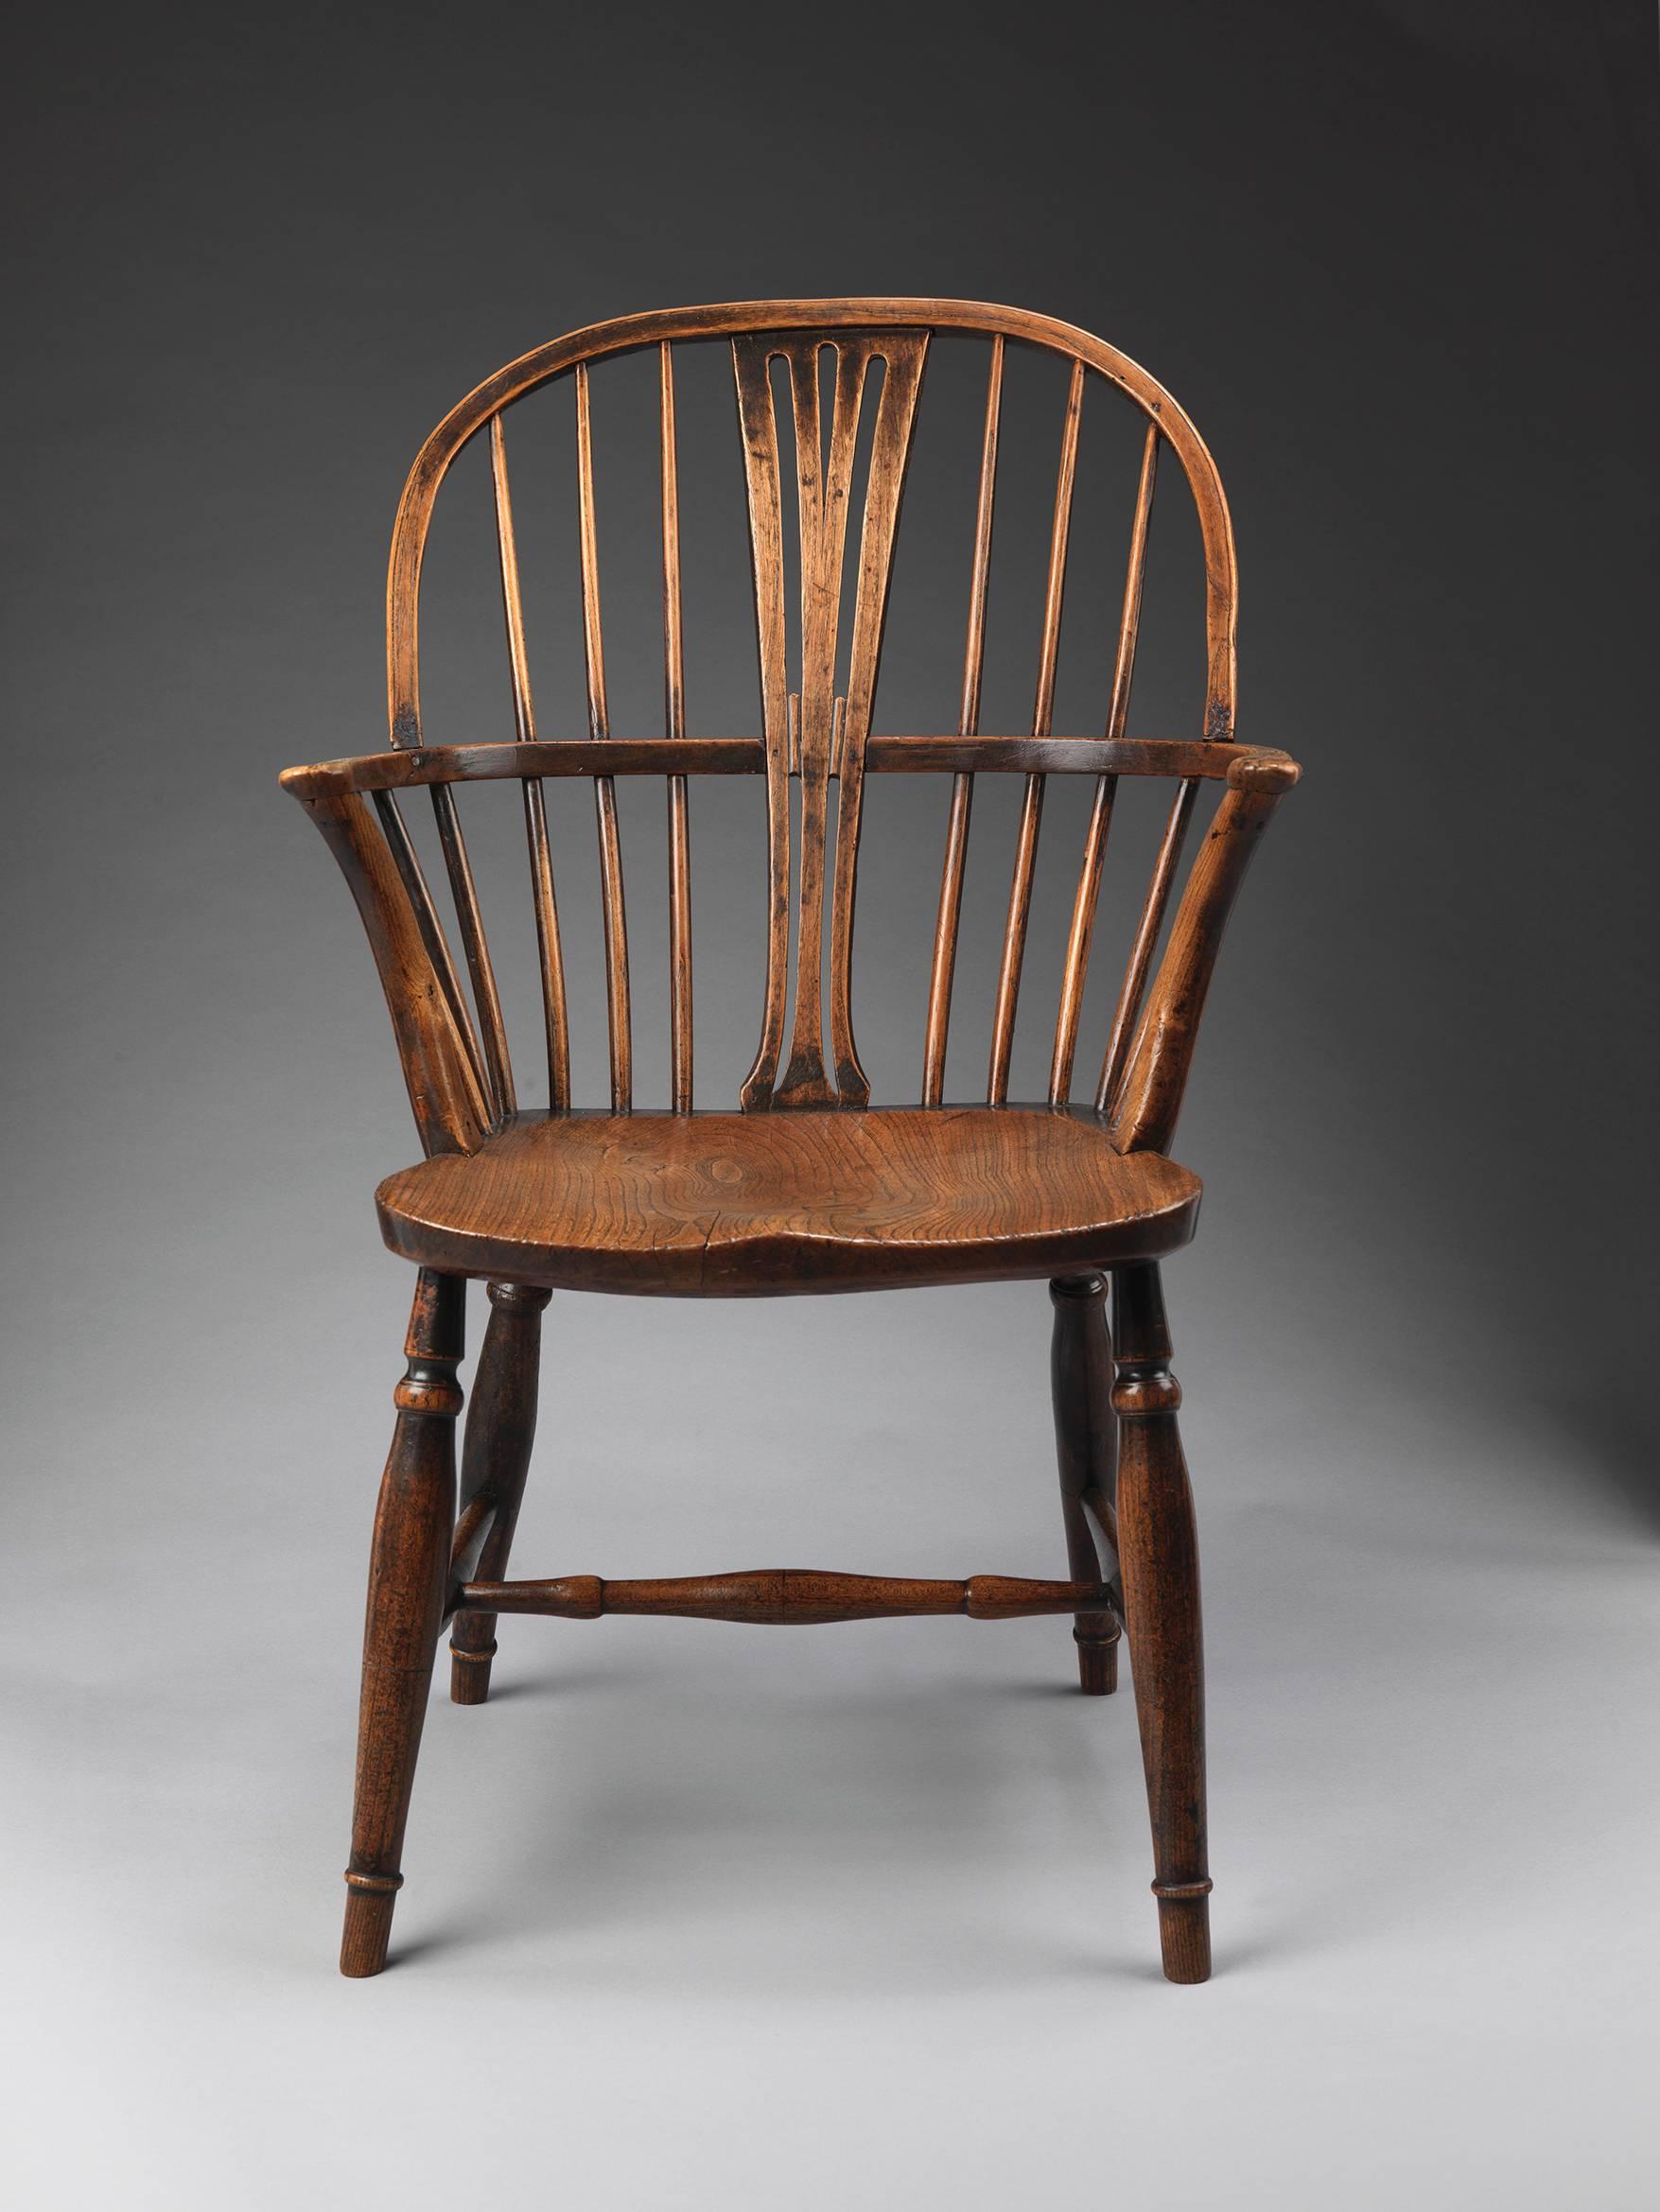 With elegant stylized wheatsheaf splat
ash and elm with original color and surface,
English, Suffolk, c.1820
35